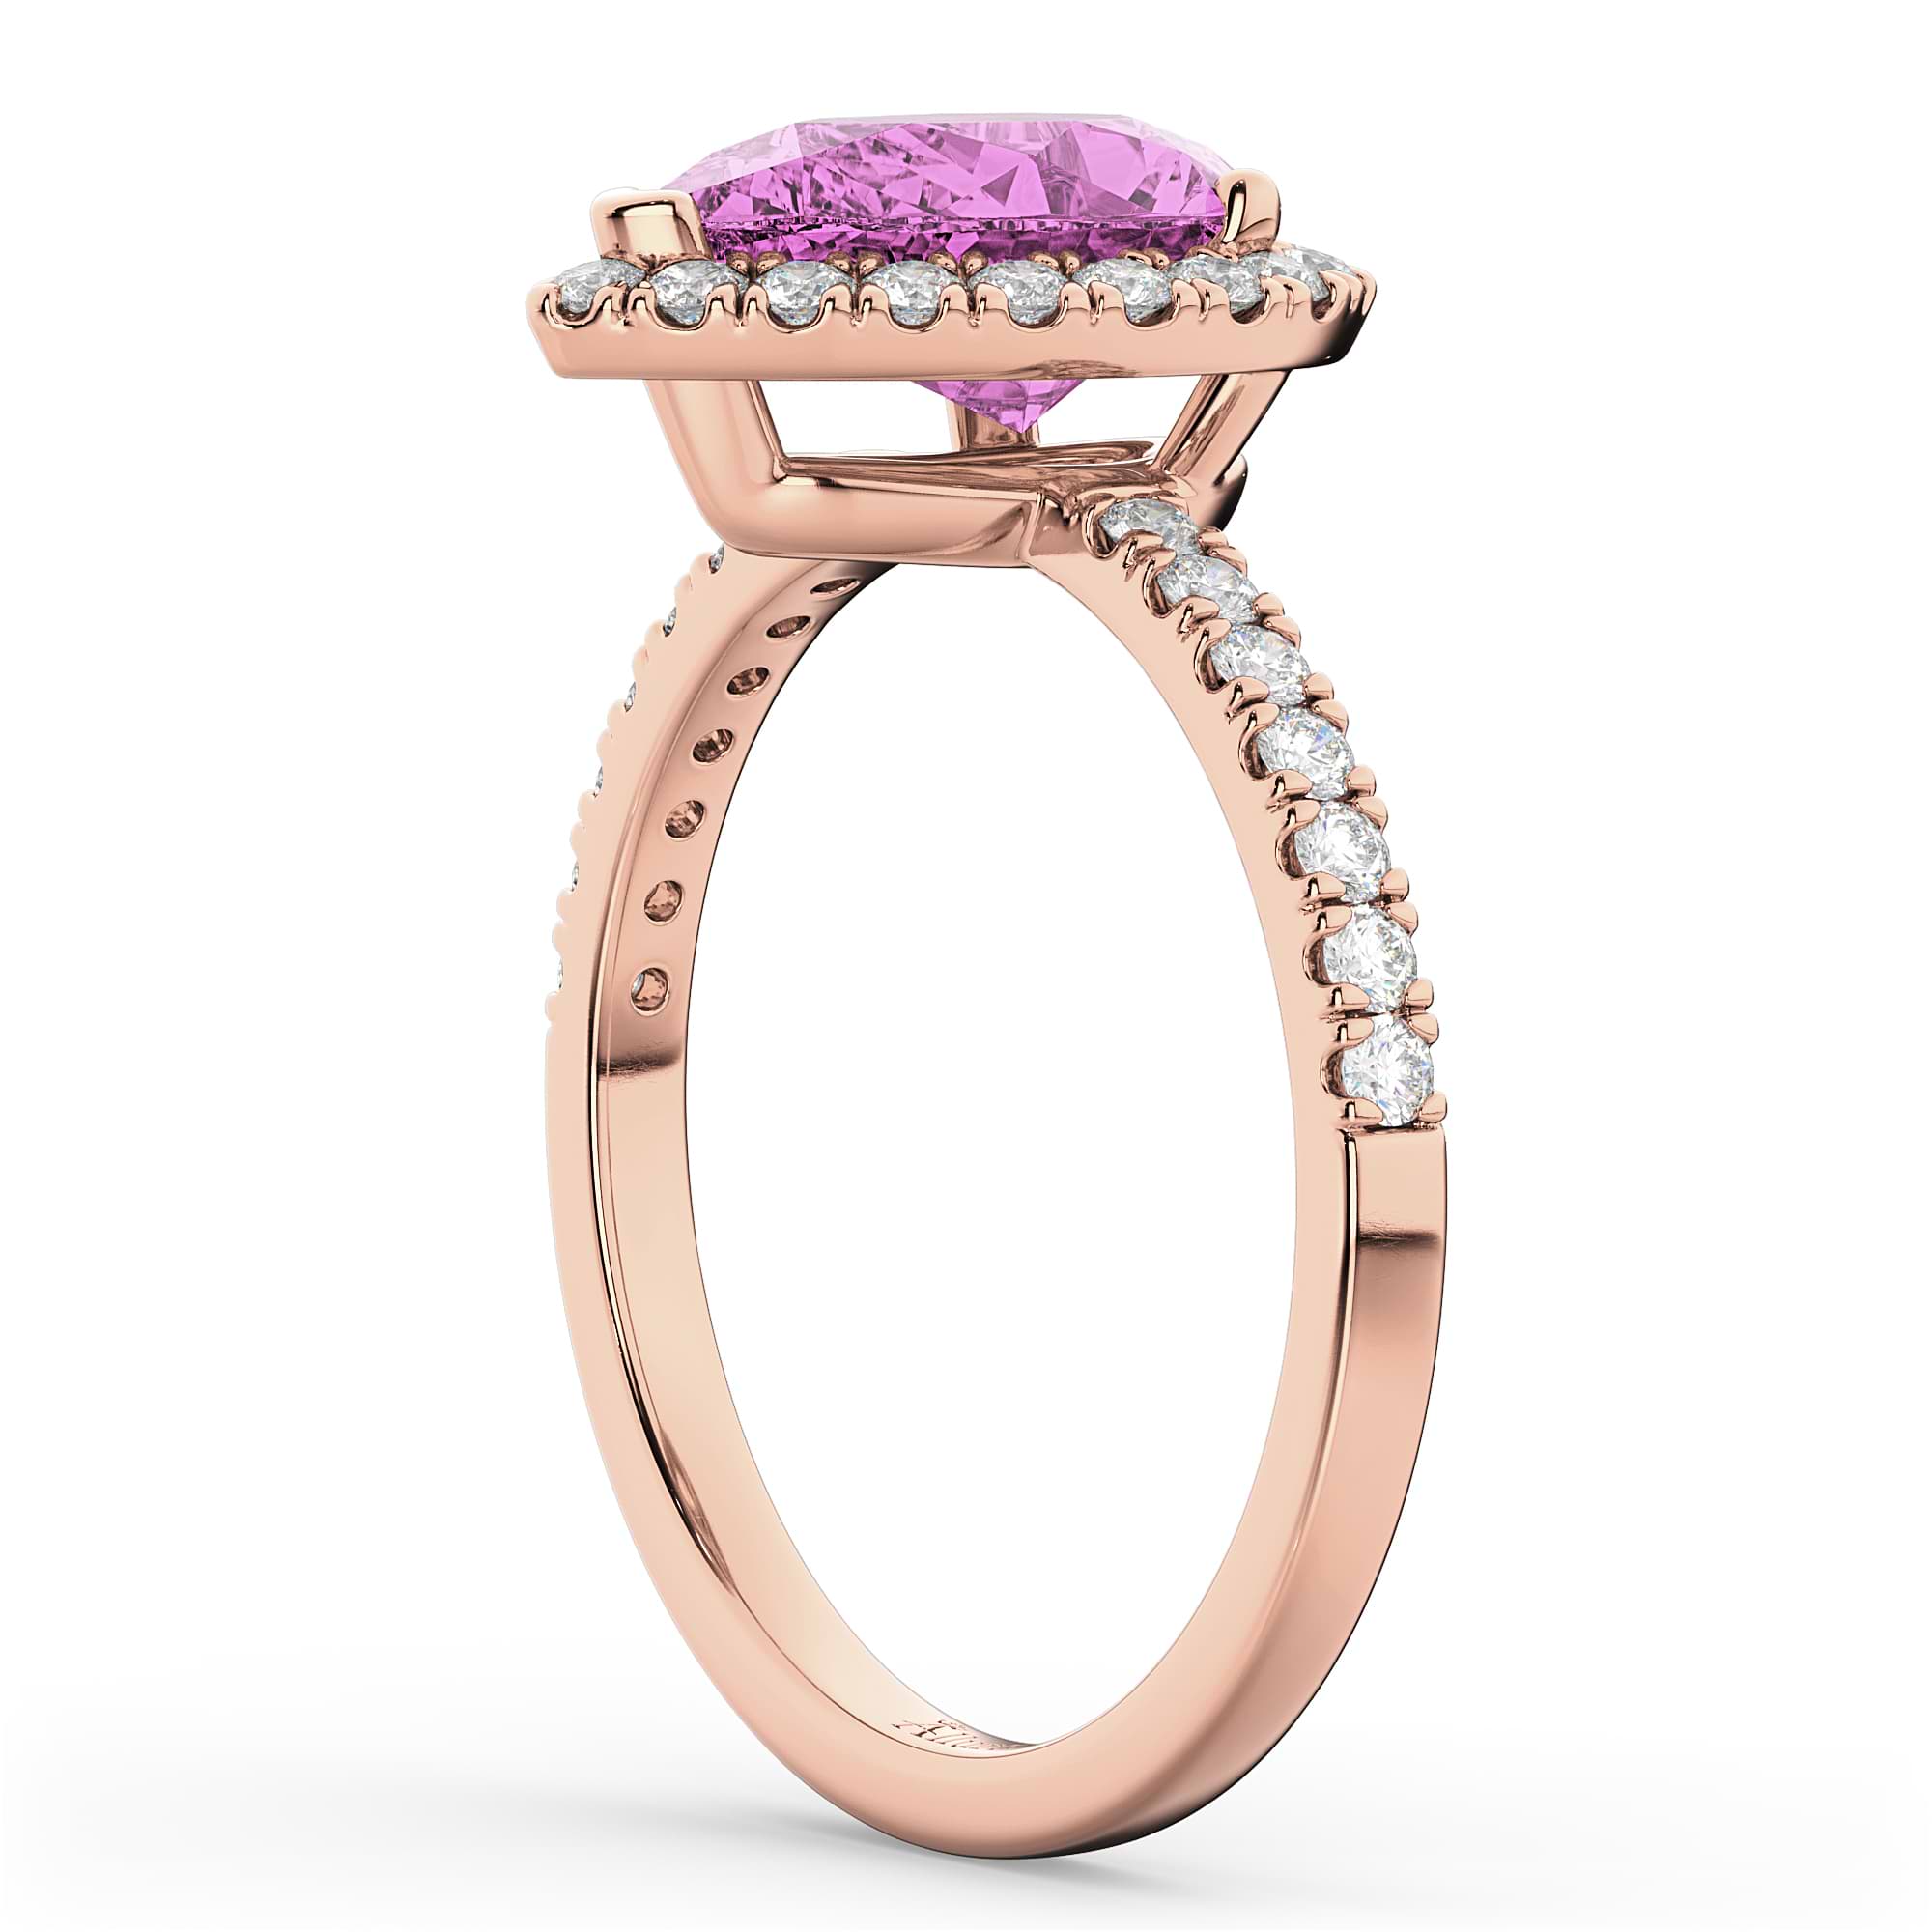 Pear Cut Halo Pink Sapphire & Diamond Engagement Ring 14K Rose Gold 3.01ct